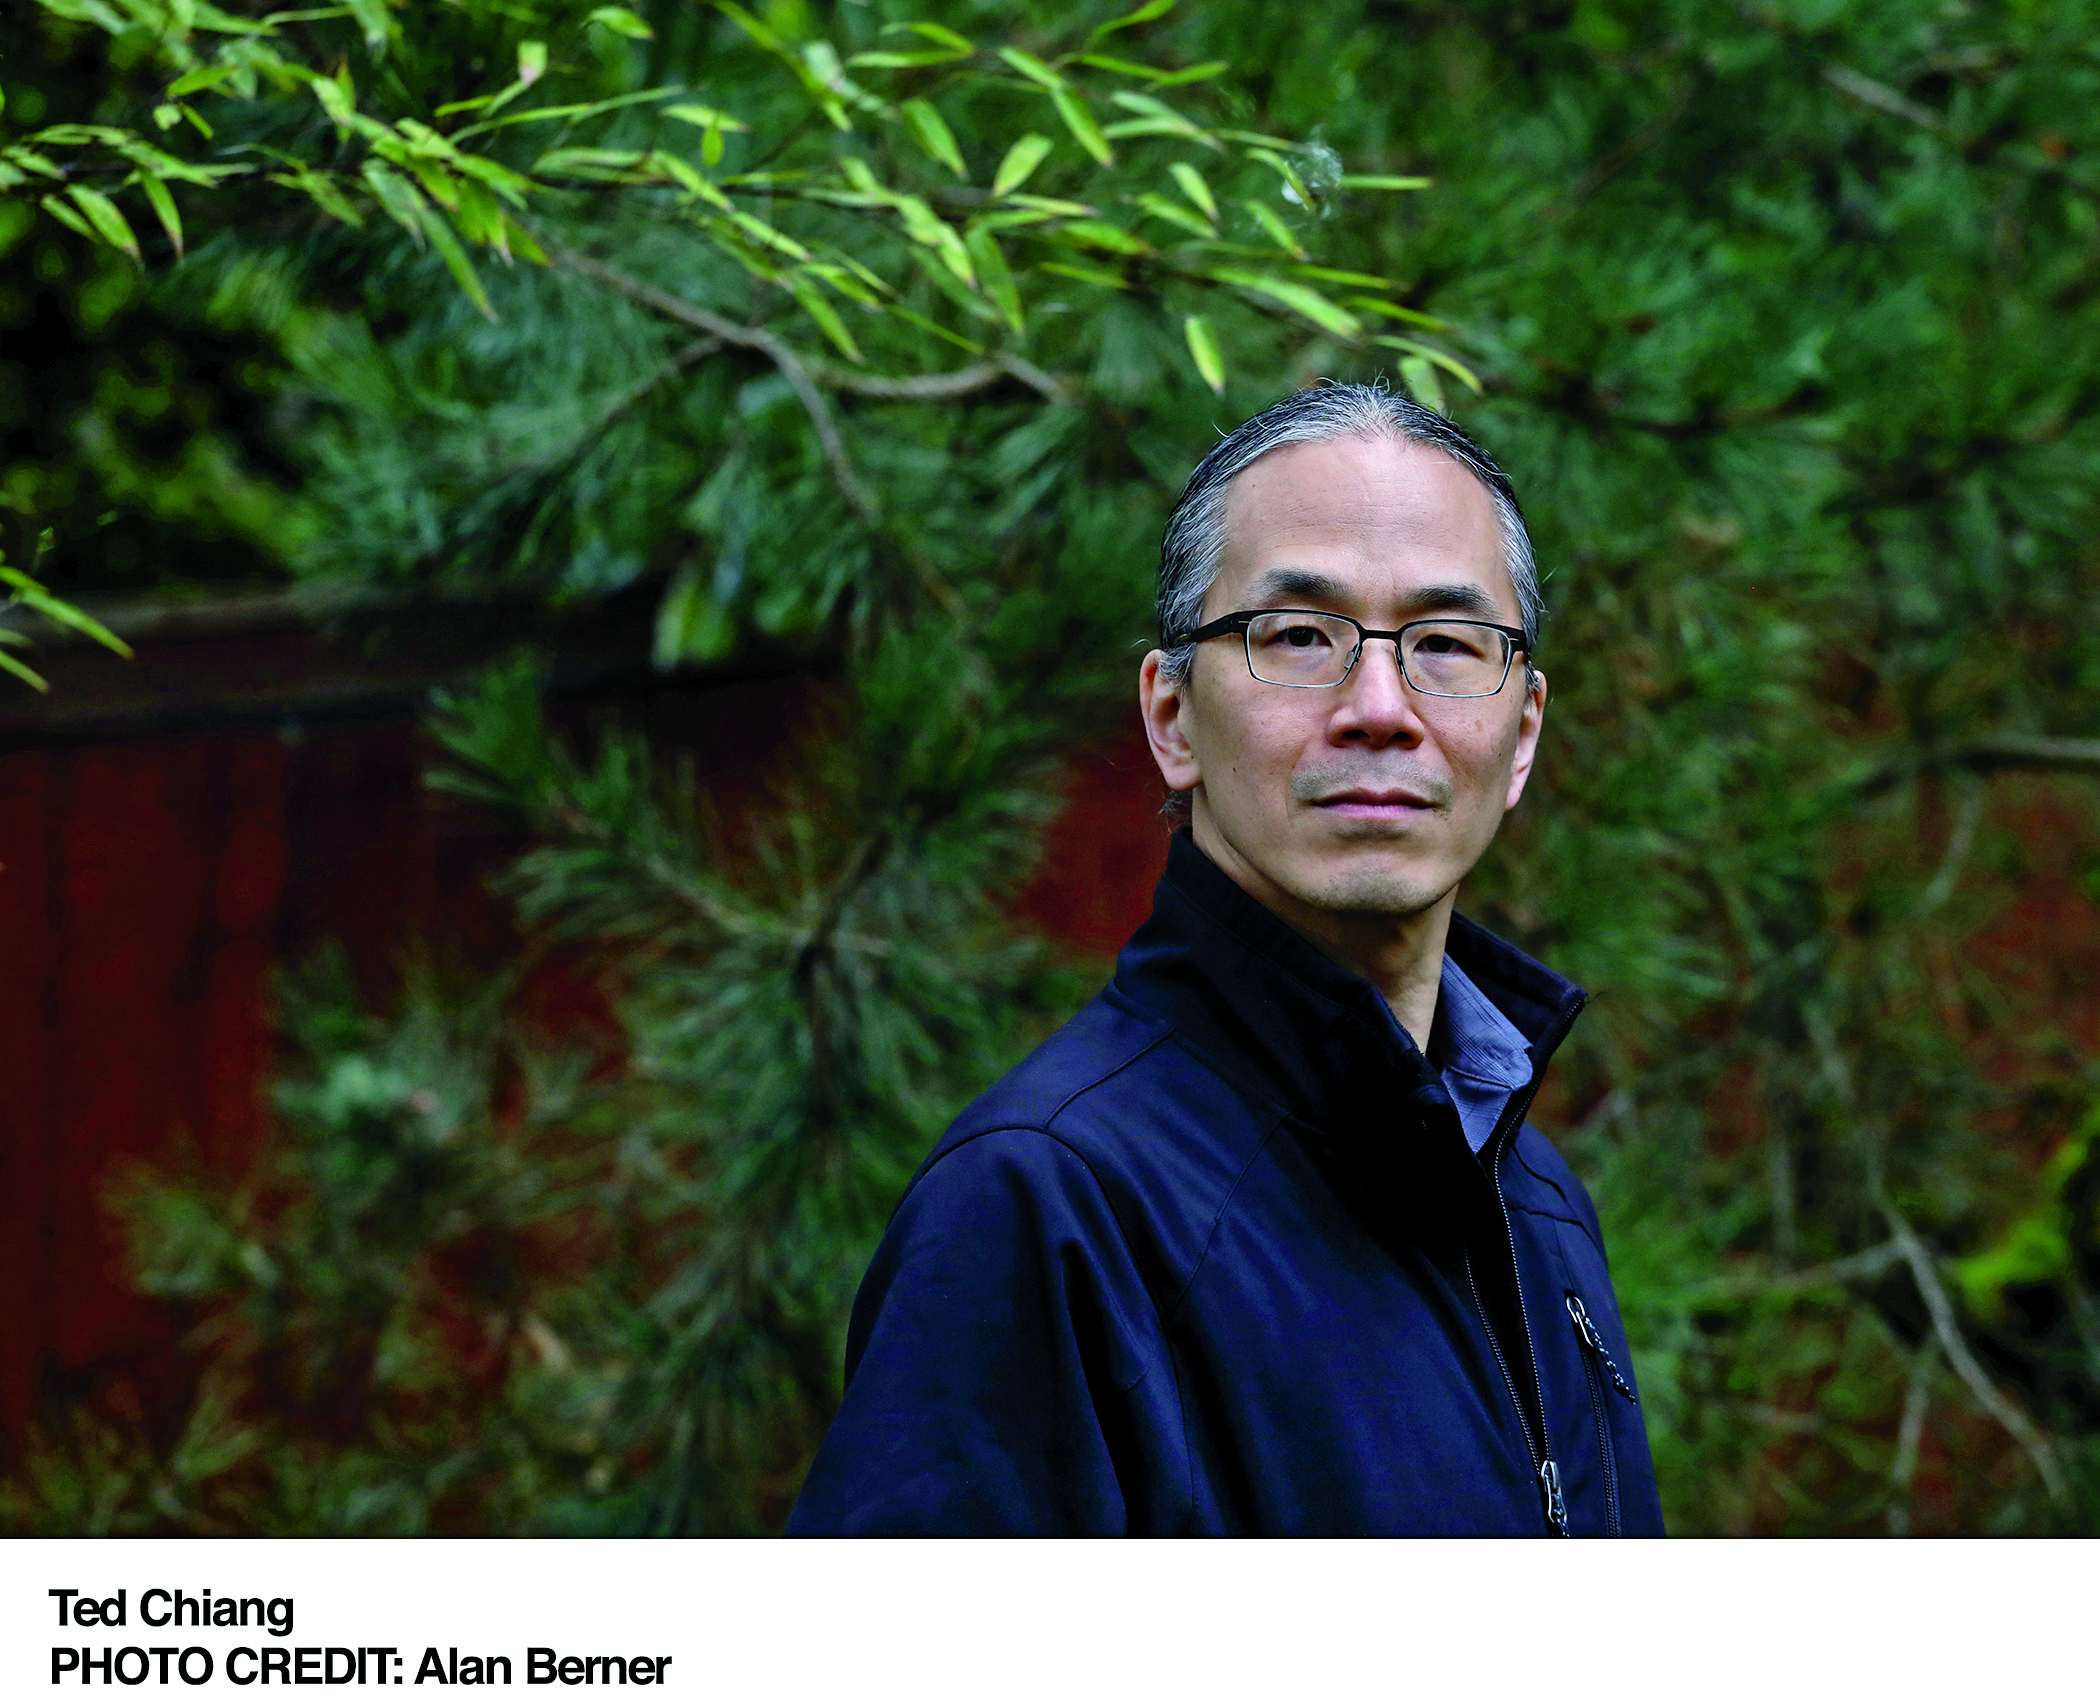 Ted Chiang looks over his shoulder at the camera. He is wearing glasses and a blue coat. 